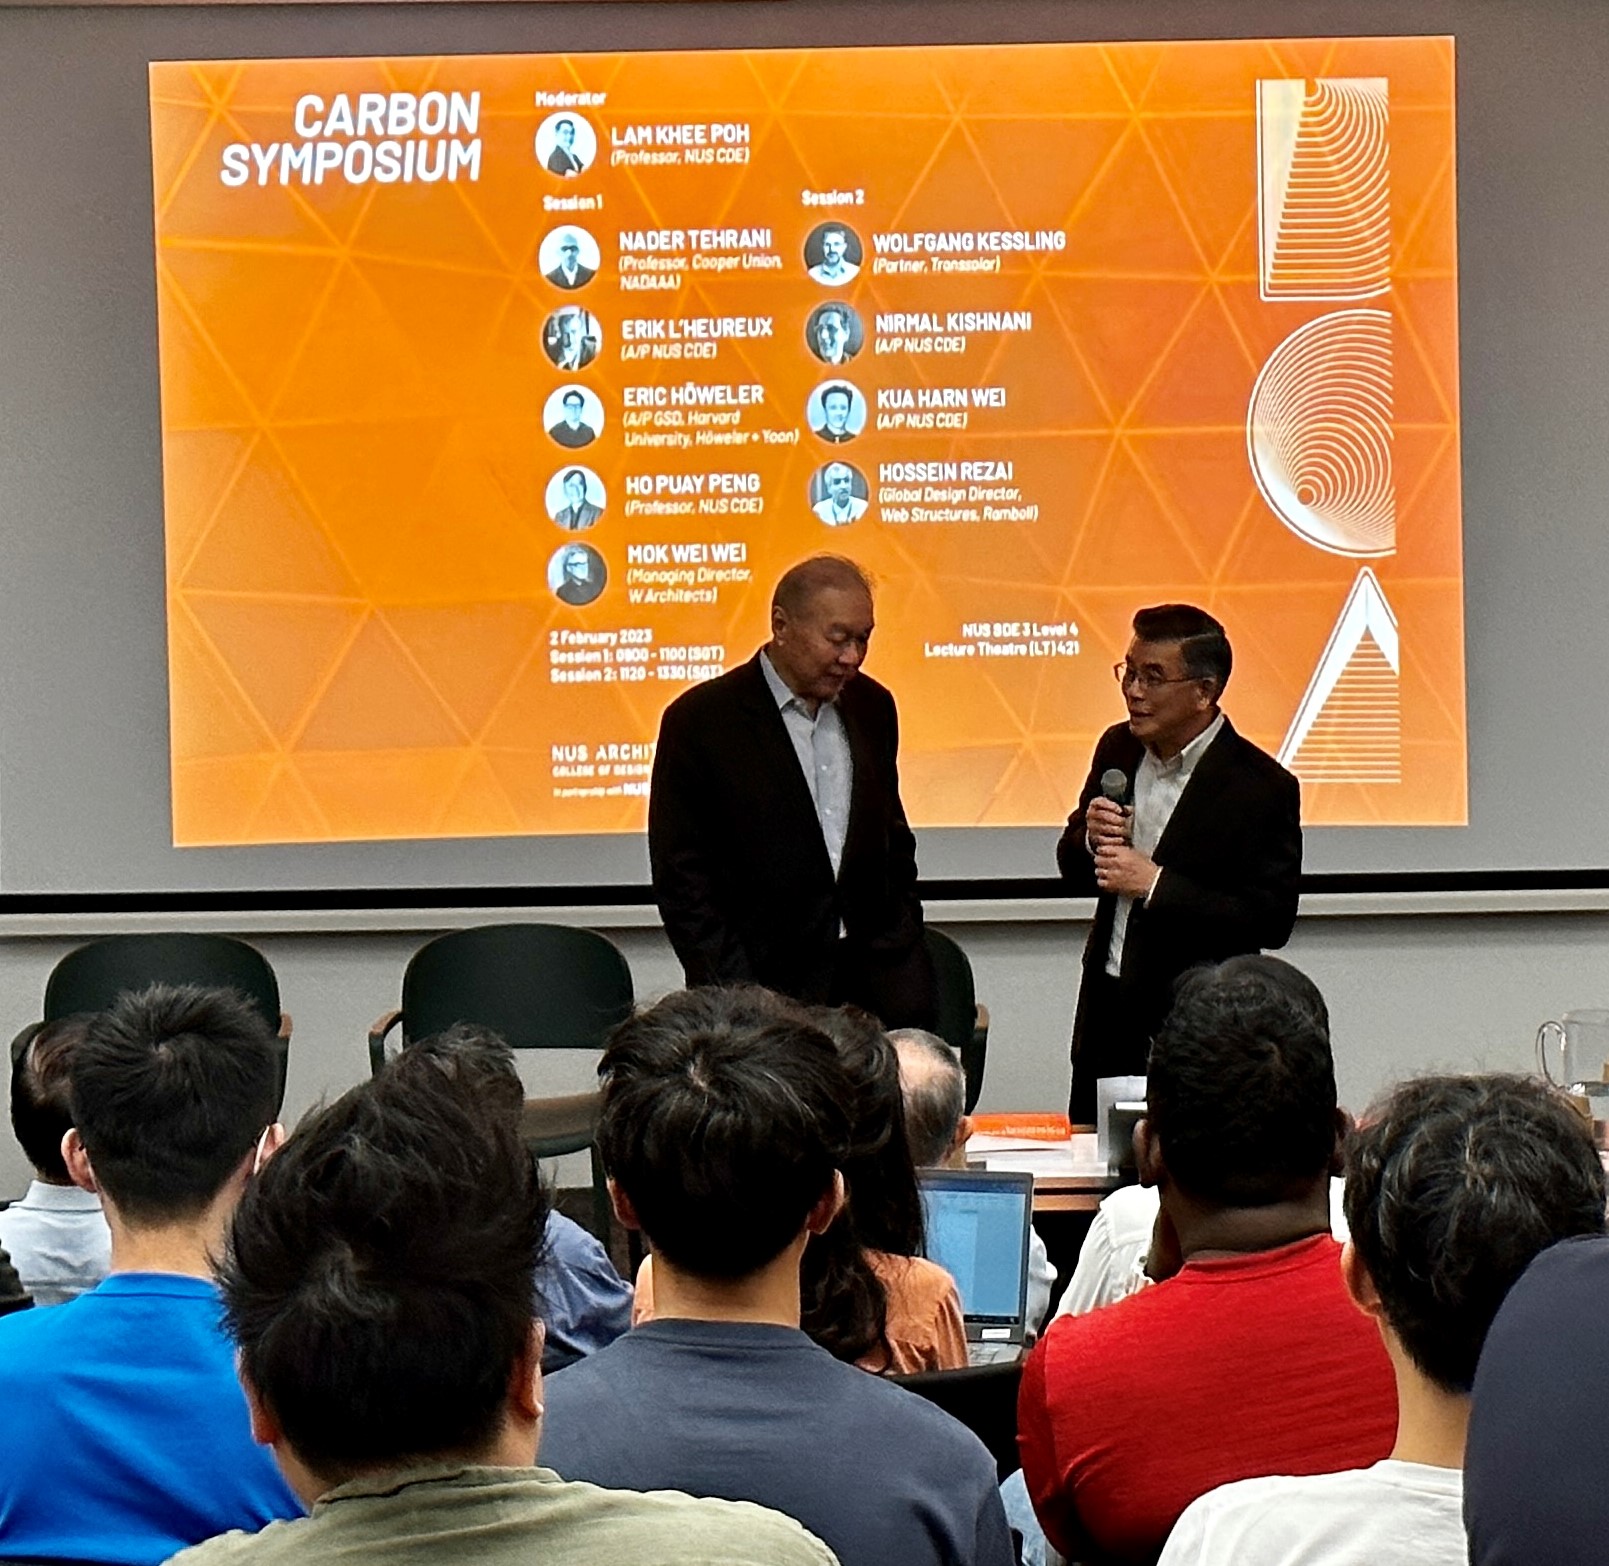 Professor Lam Khee Poh (right) from the College of Design and Engineering at NUS, who moderated the symposium, with Professor Low Teck Seng, NUS Senior Vice President (Sustainability and Resilience), who gave the opening address.